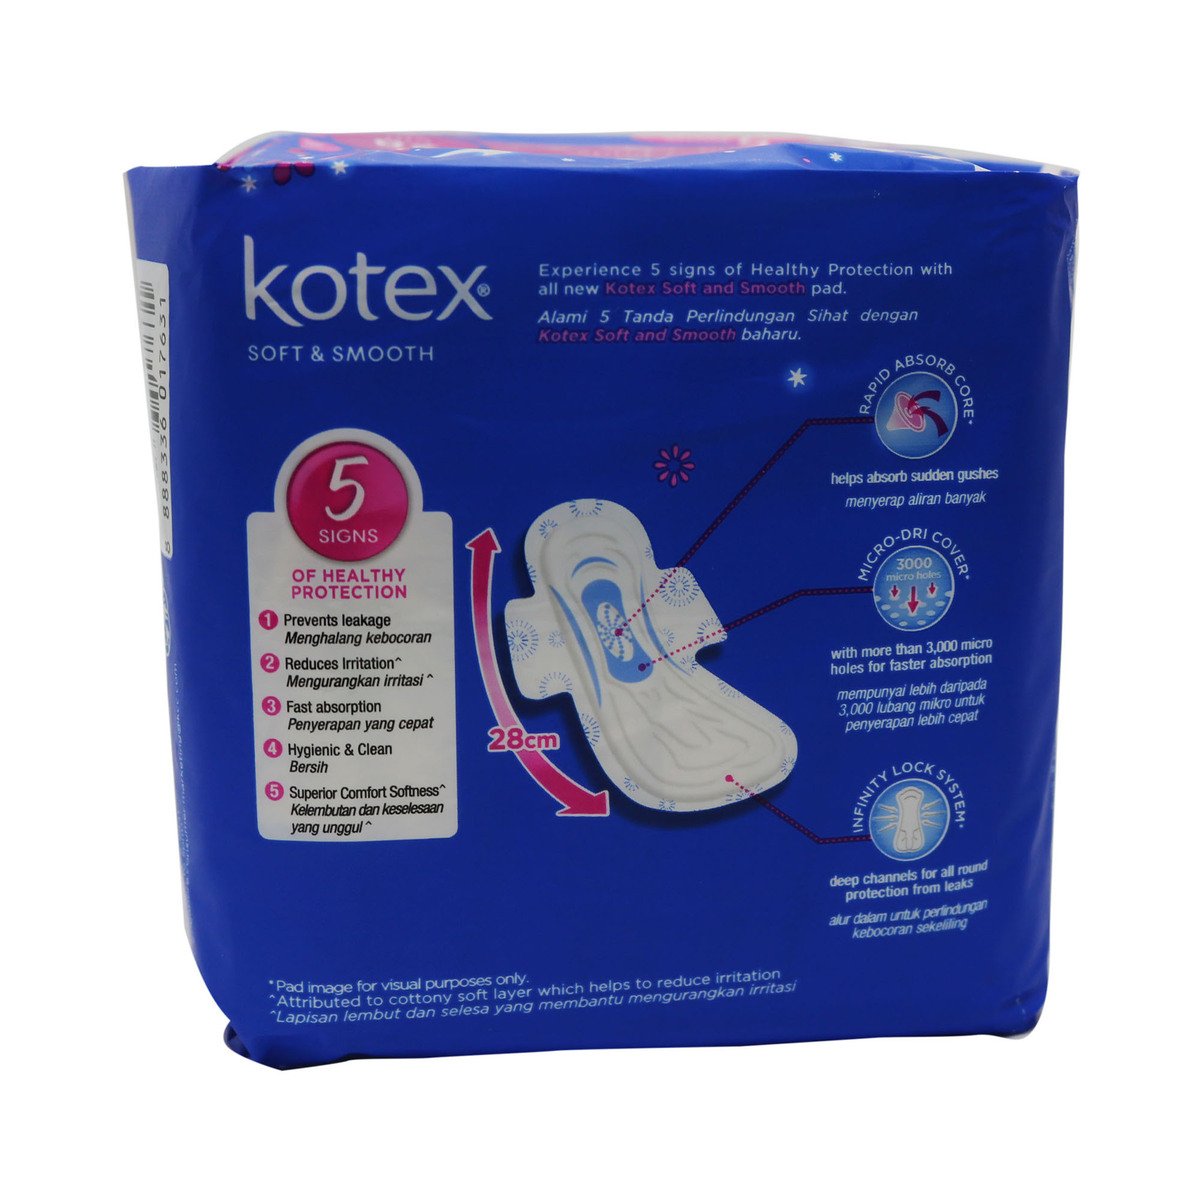 Kotex Soft Side Overnight Wing 28Cm 7 Counts